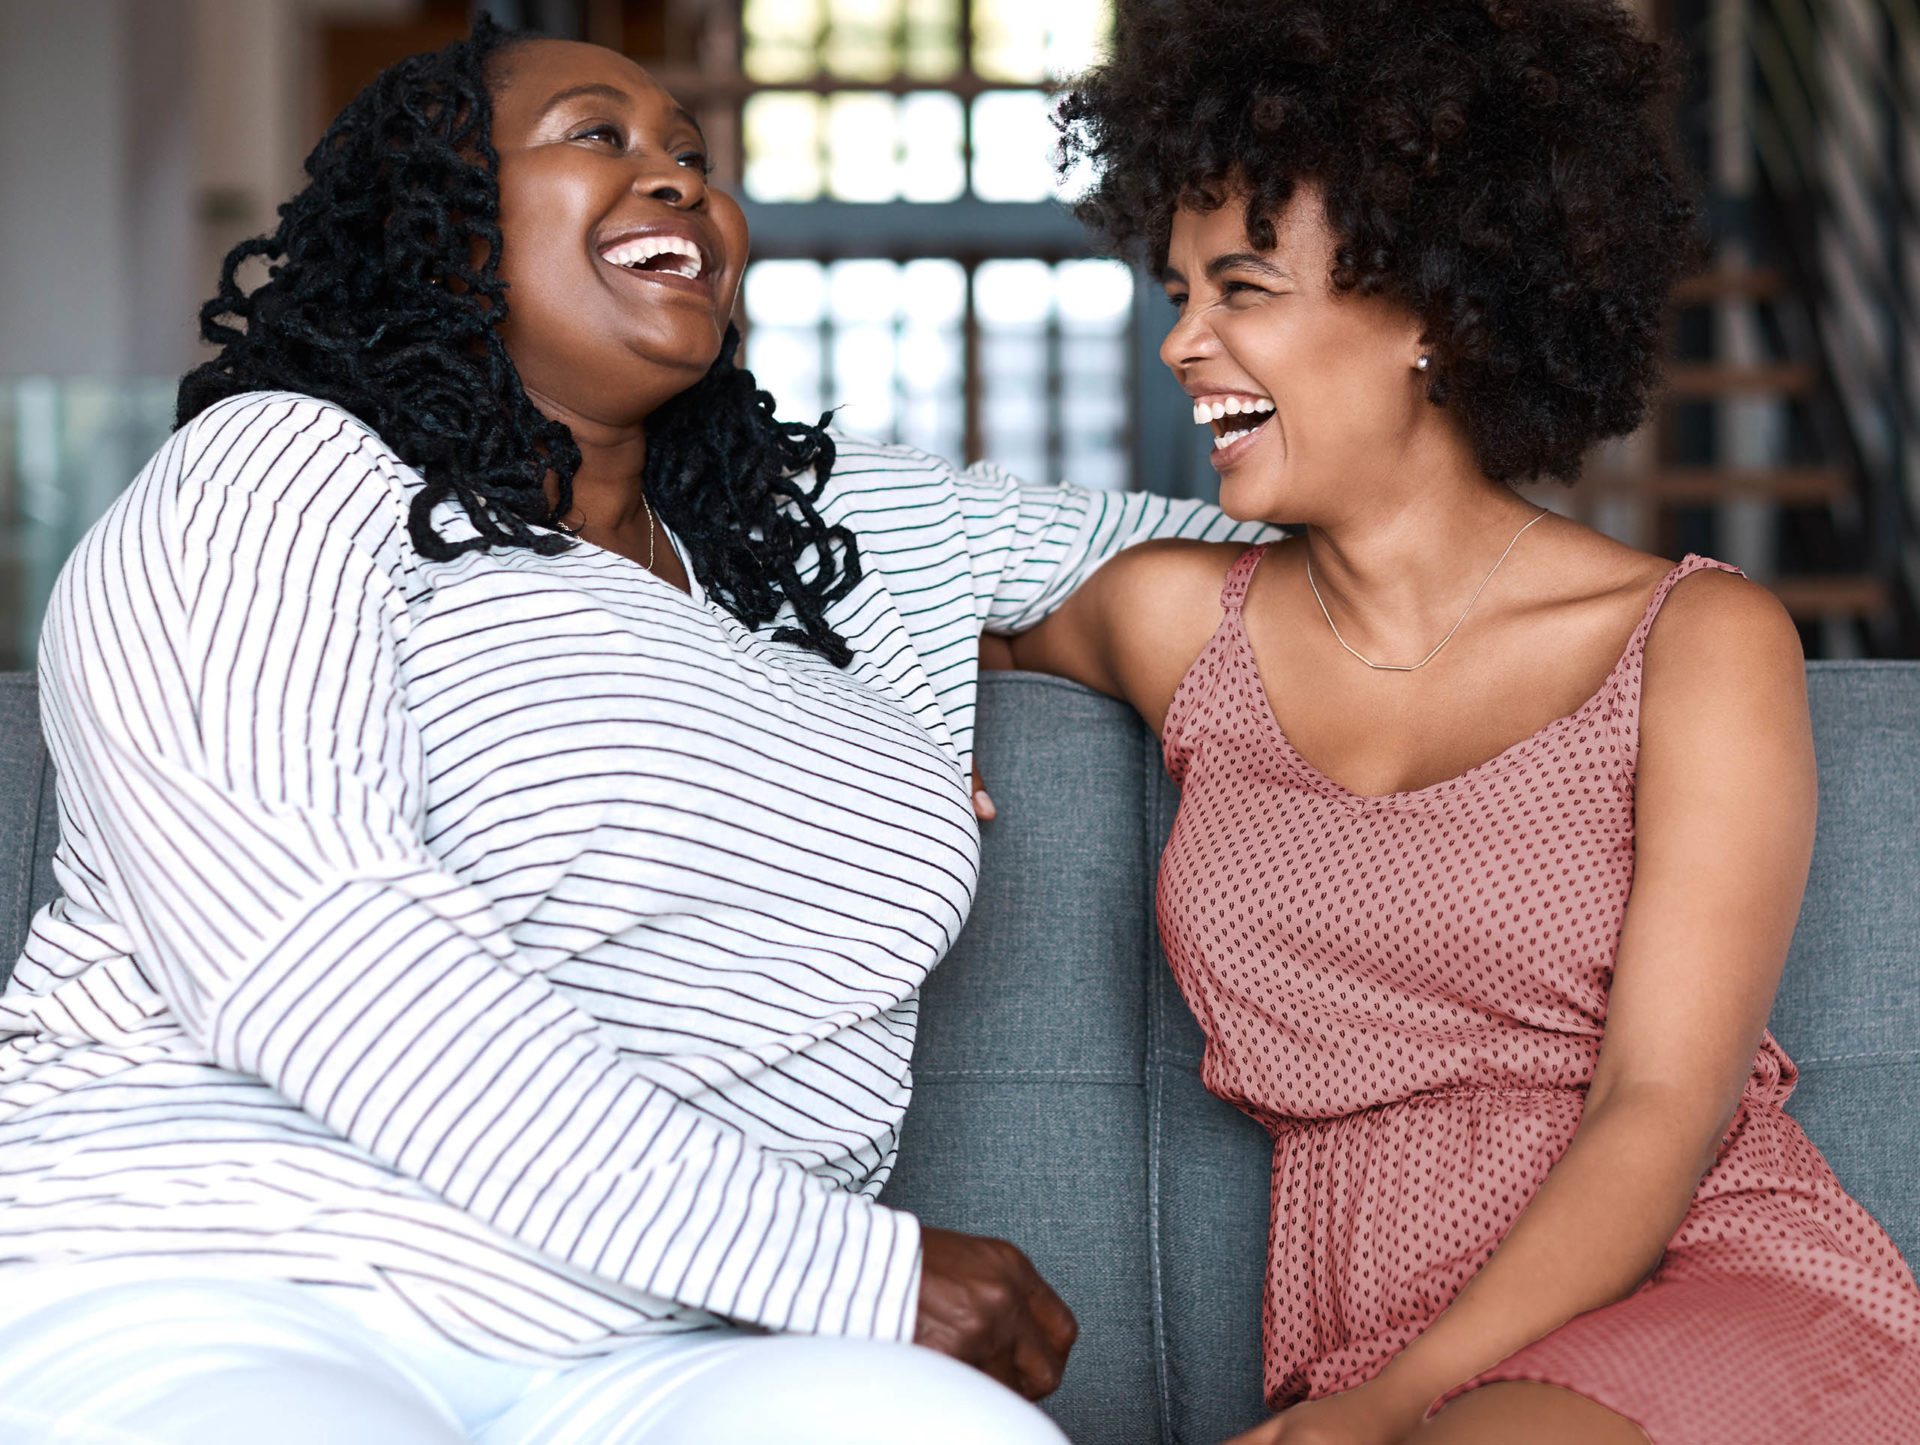 Two women laughing on a couch.